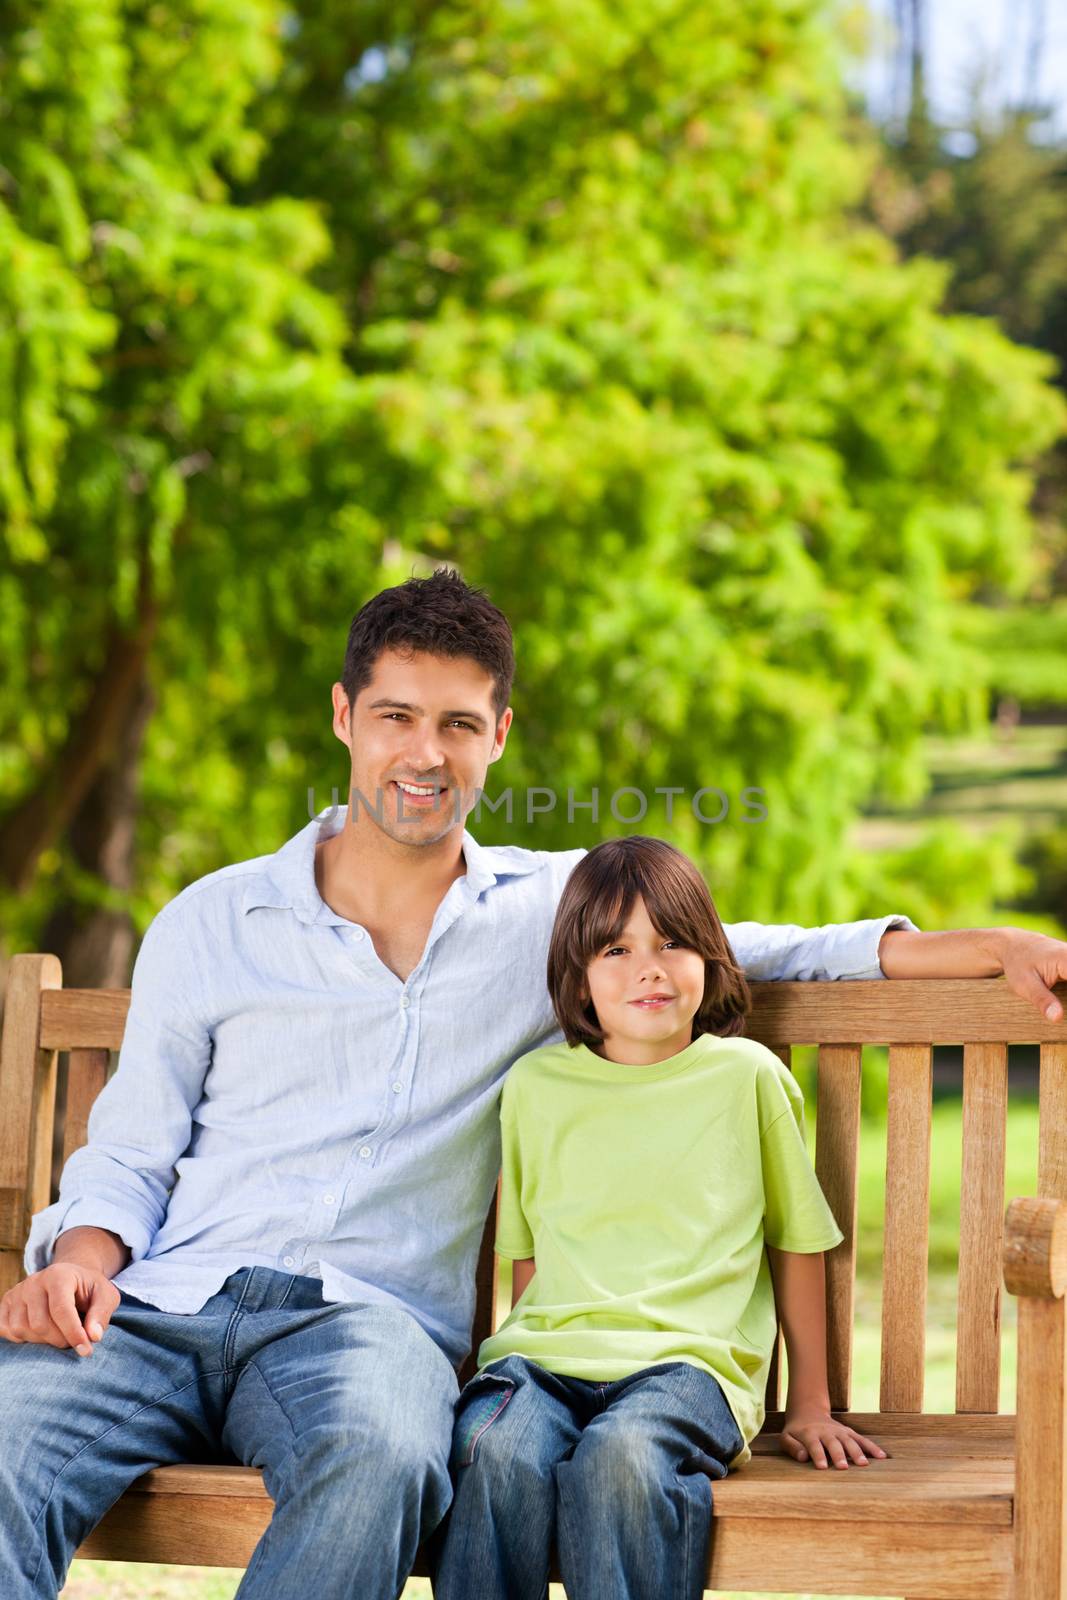 Father with his son on the bench during the summer